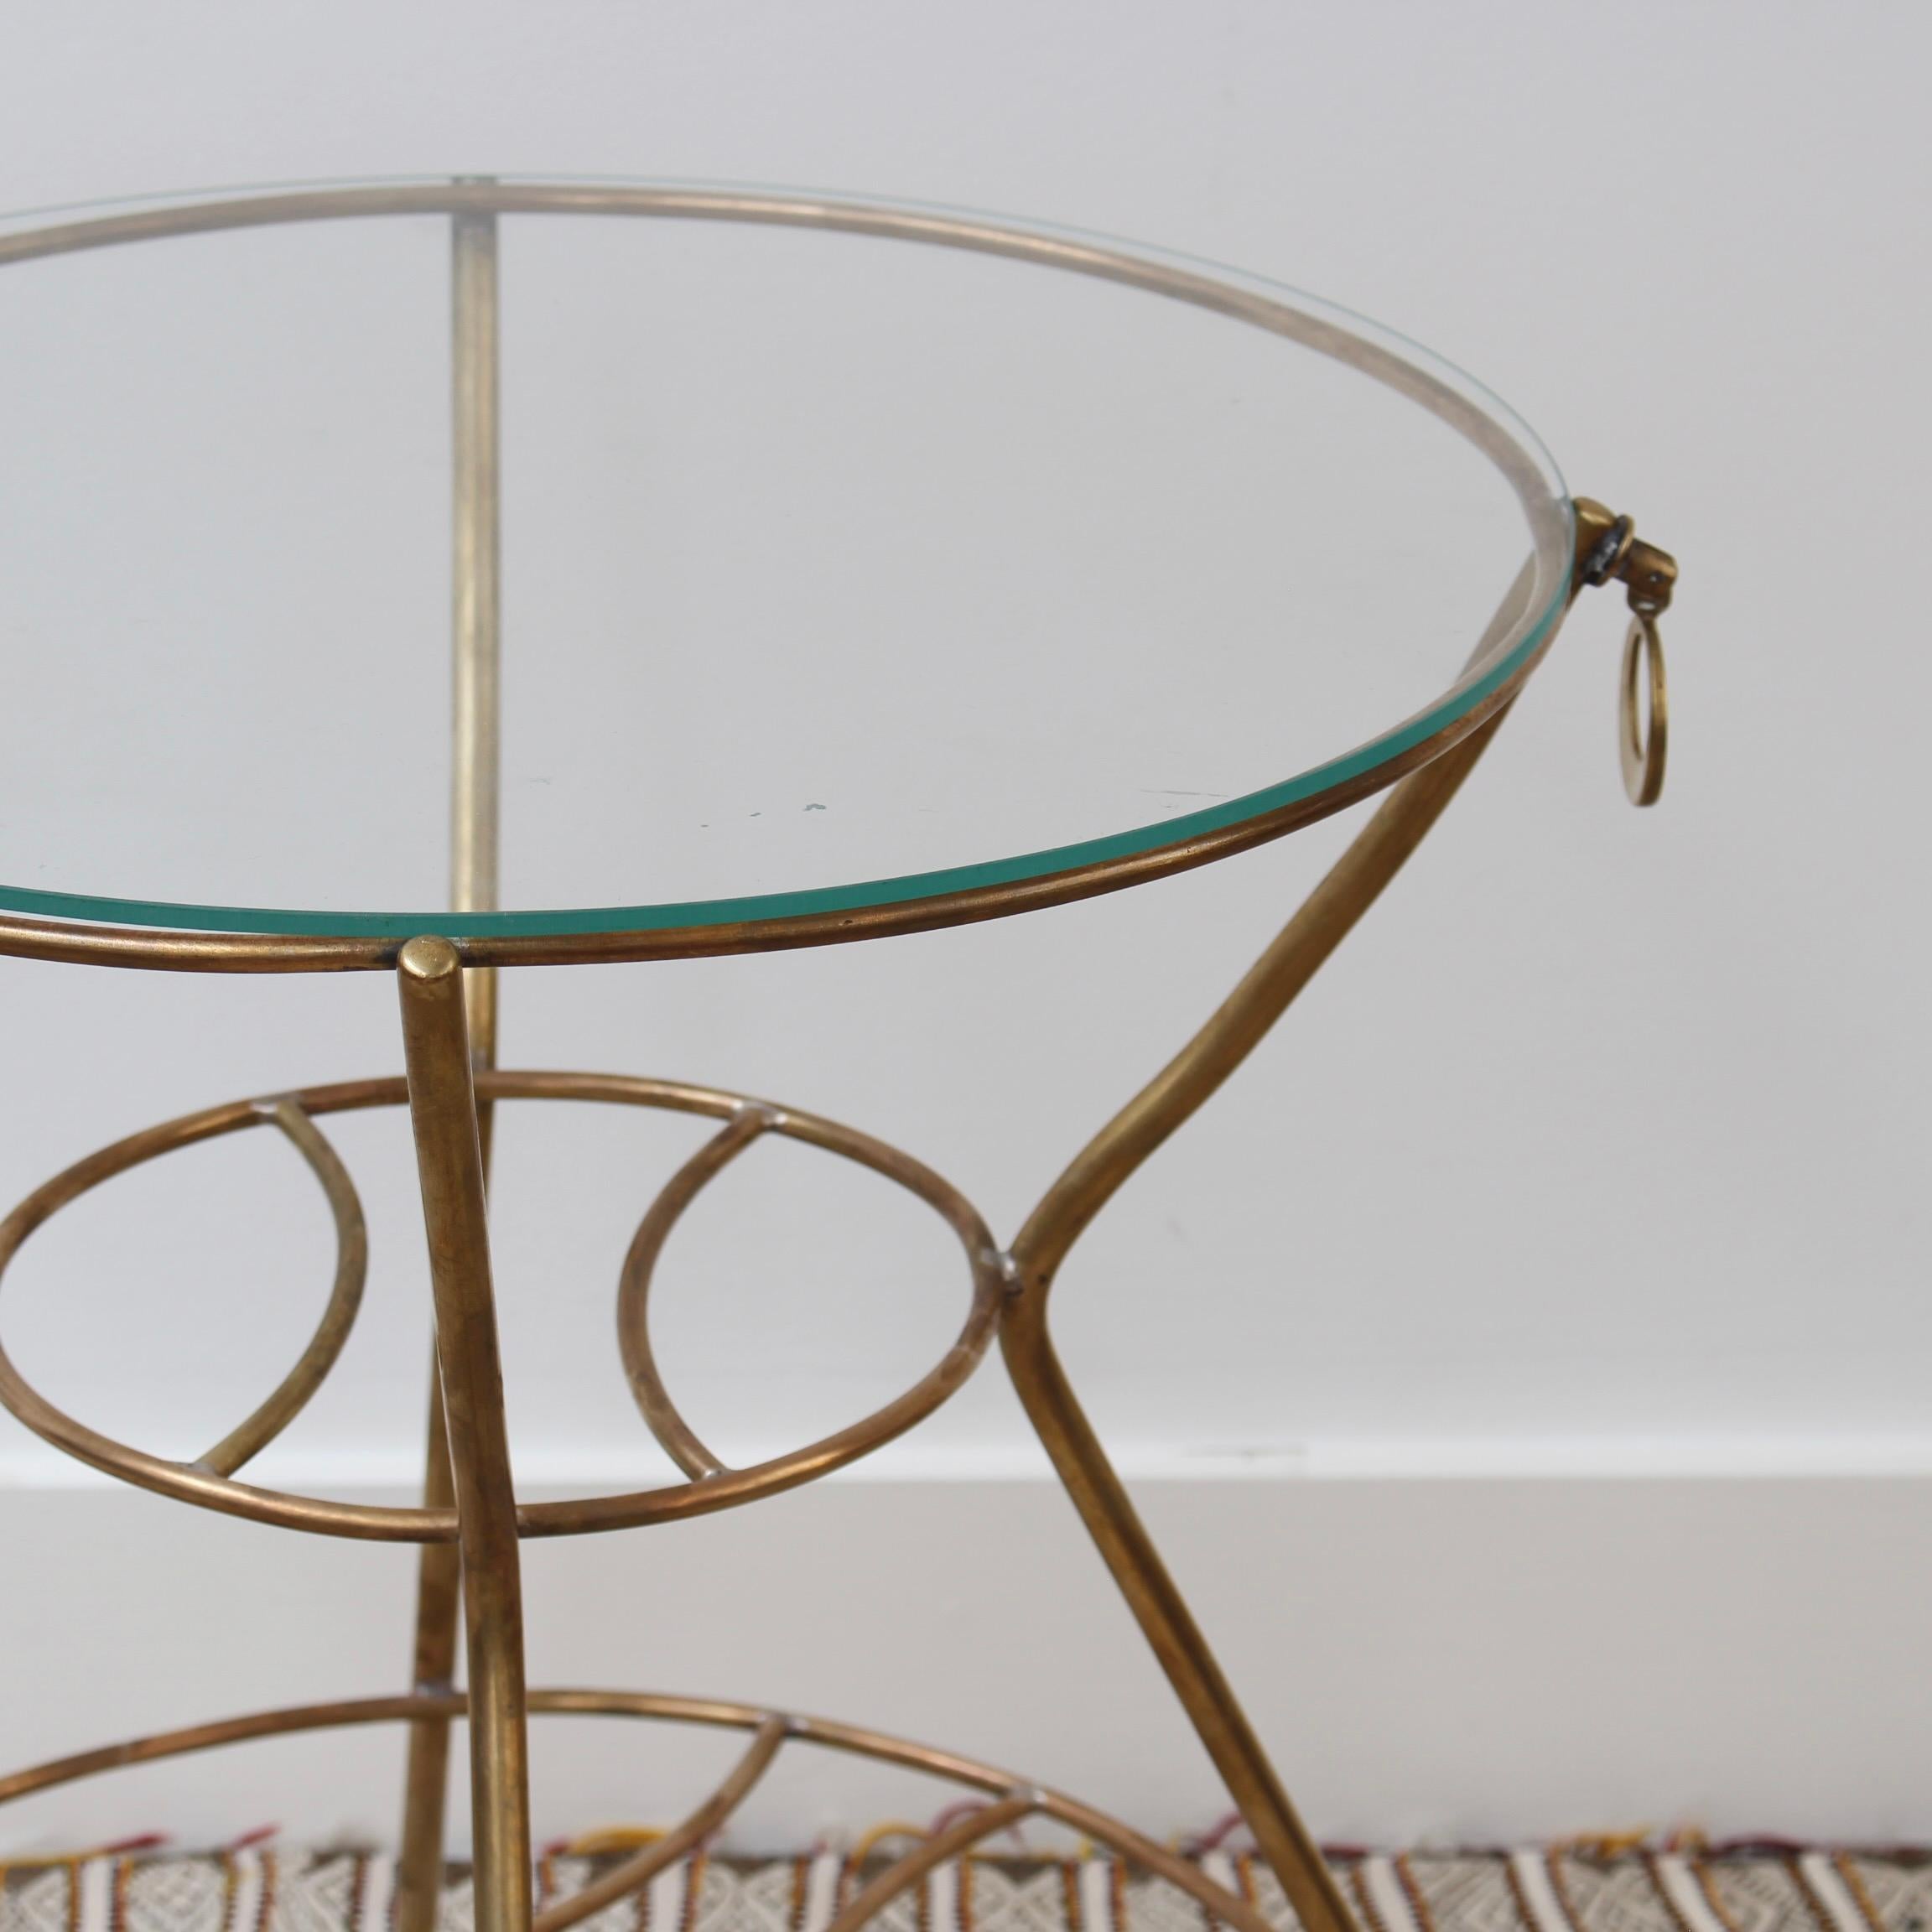 Vintage Italian Side Table with Brass Legs and Glass Top 'circa 1960s' For Sale 1